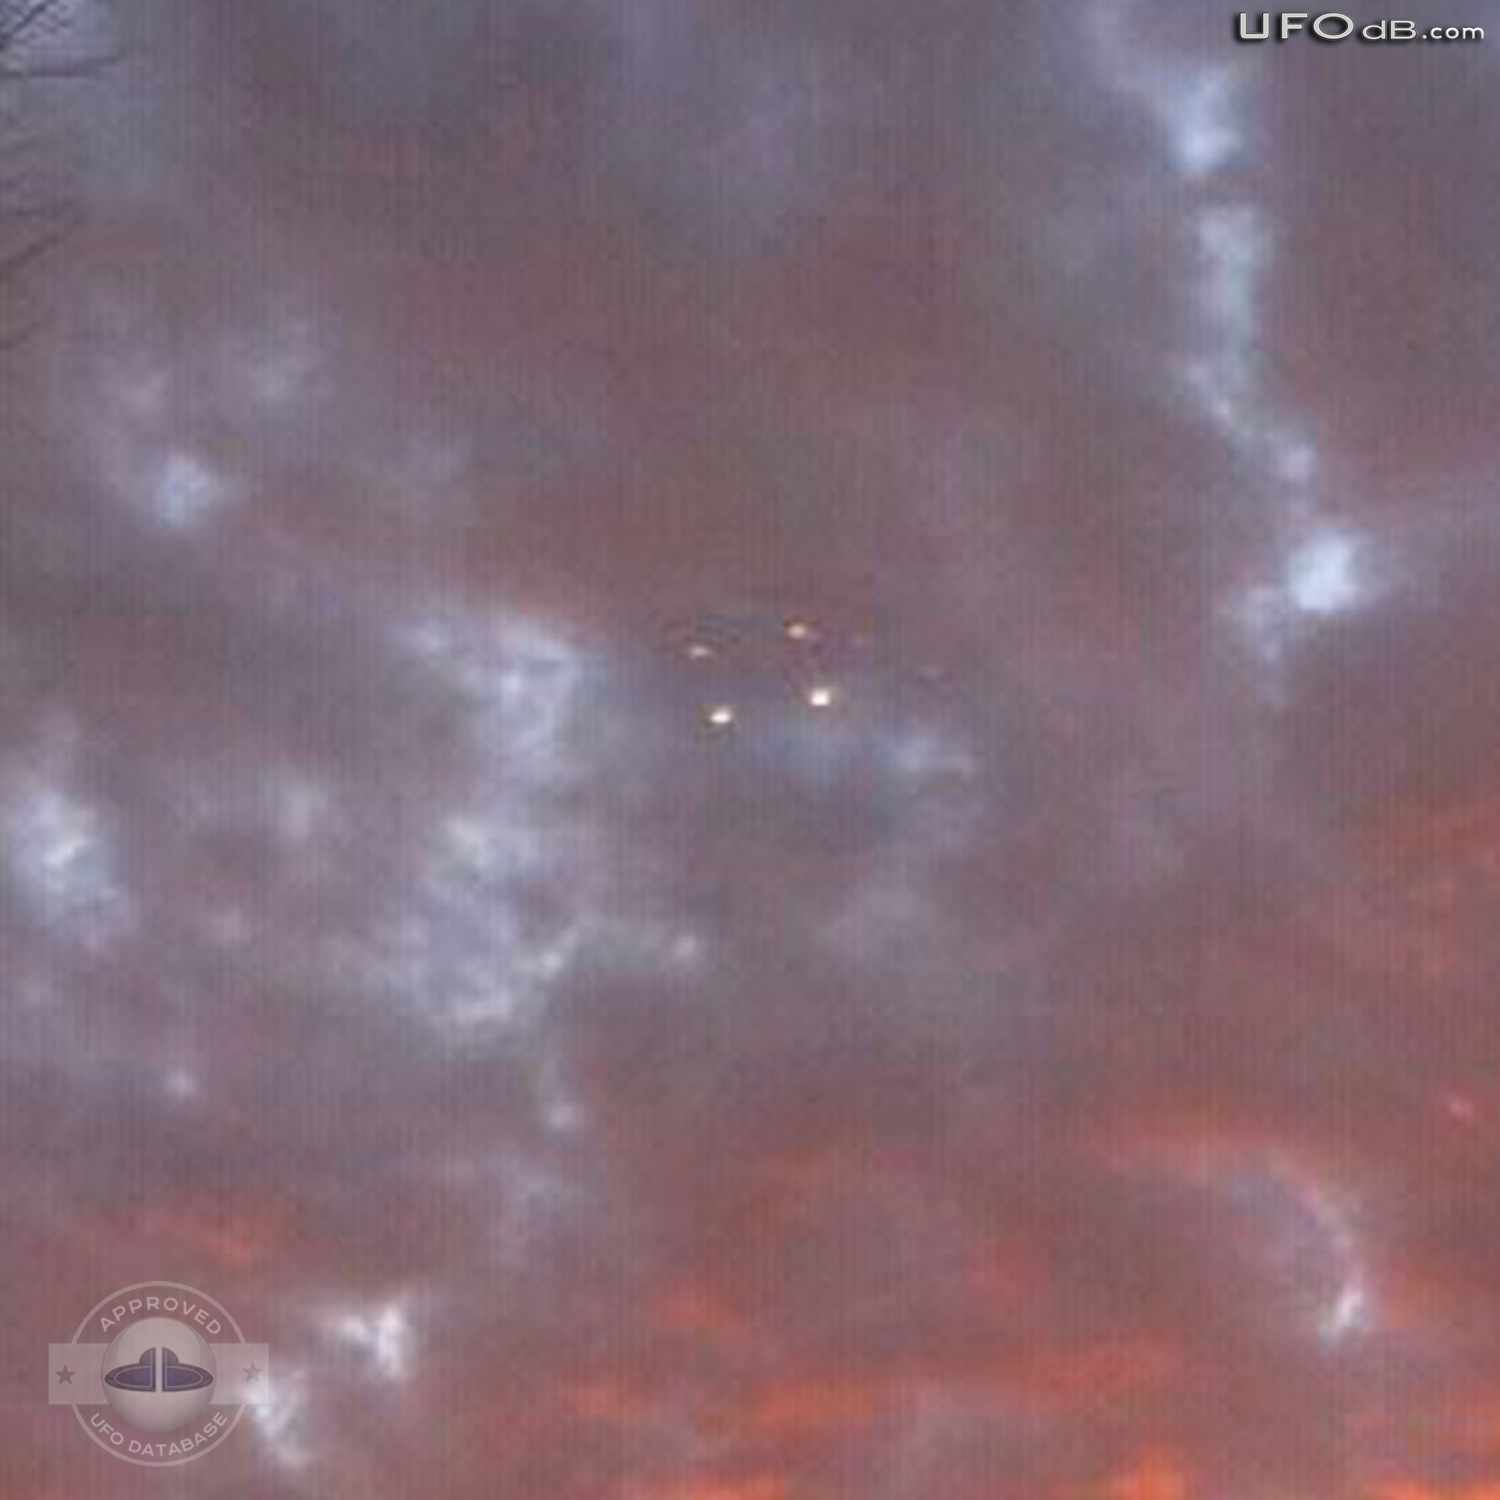 A picture from Madisonville show a UFO hiding in the clouds | USA 2011 UFO Picture #277-3